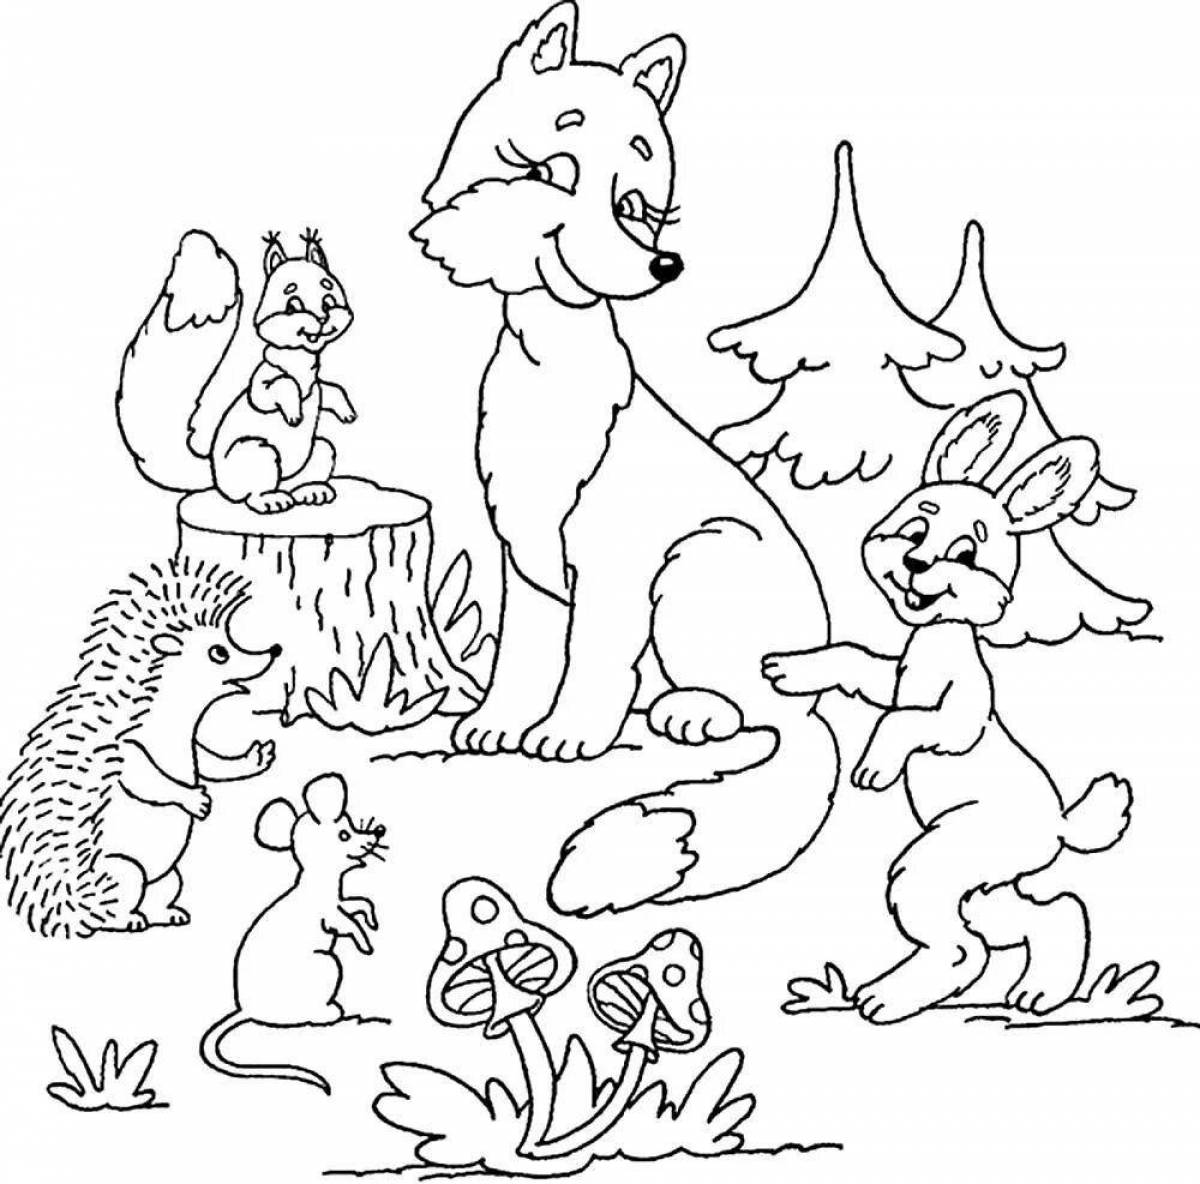 Adorable wild animal coloring book for 5 year olds